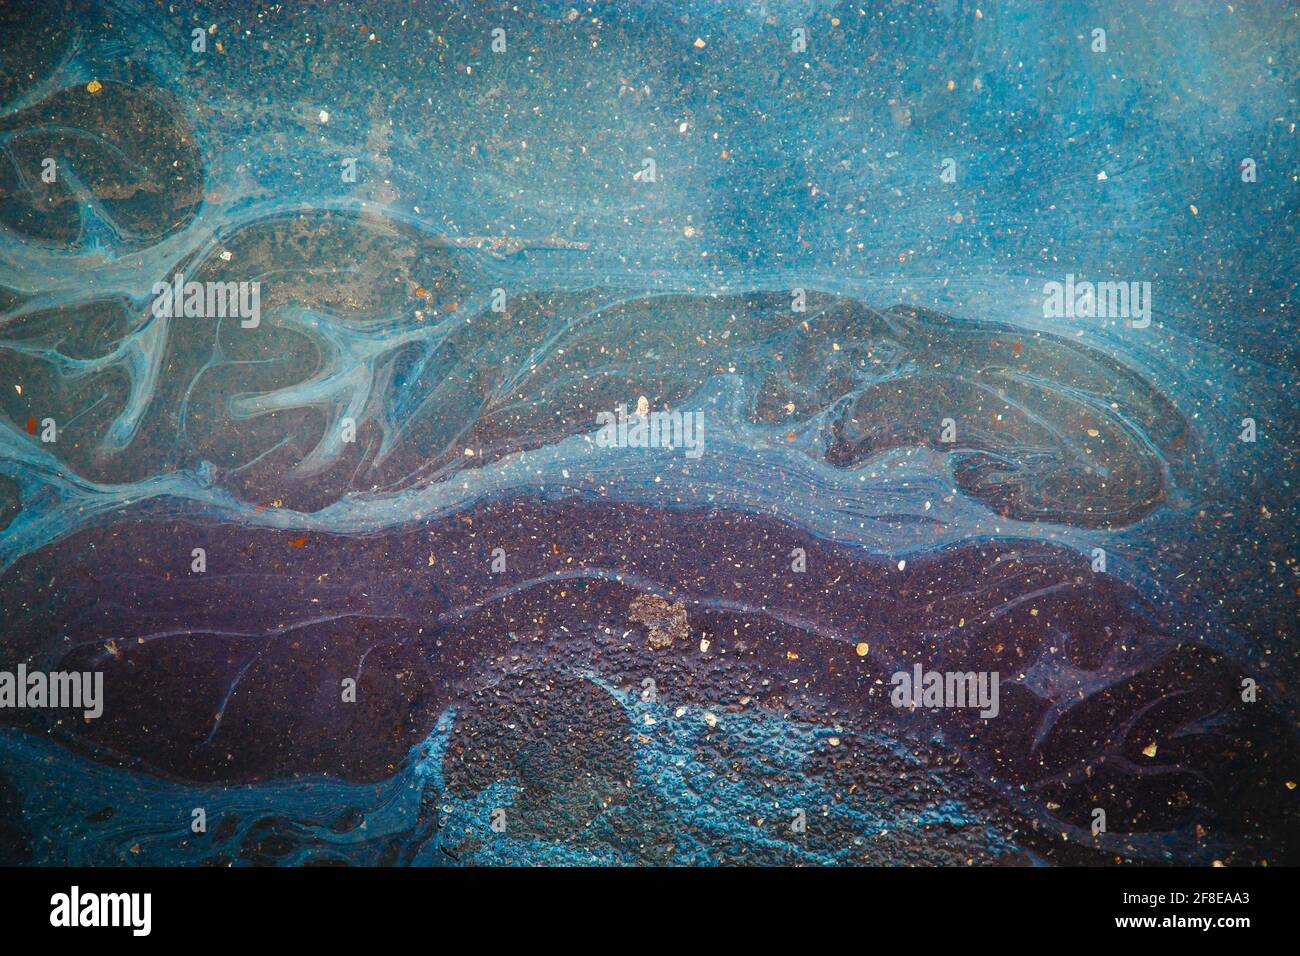 Oil Spill On Asphalt High Resolution Stock Photography and Images - Alamy